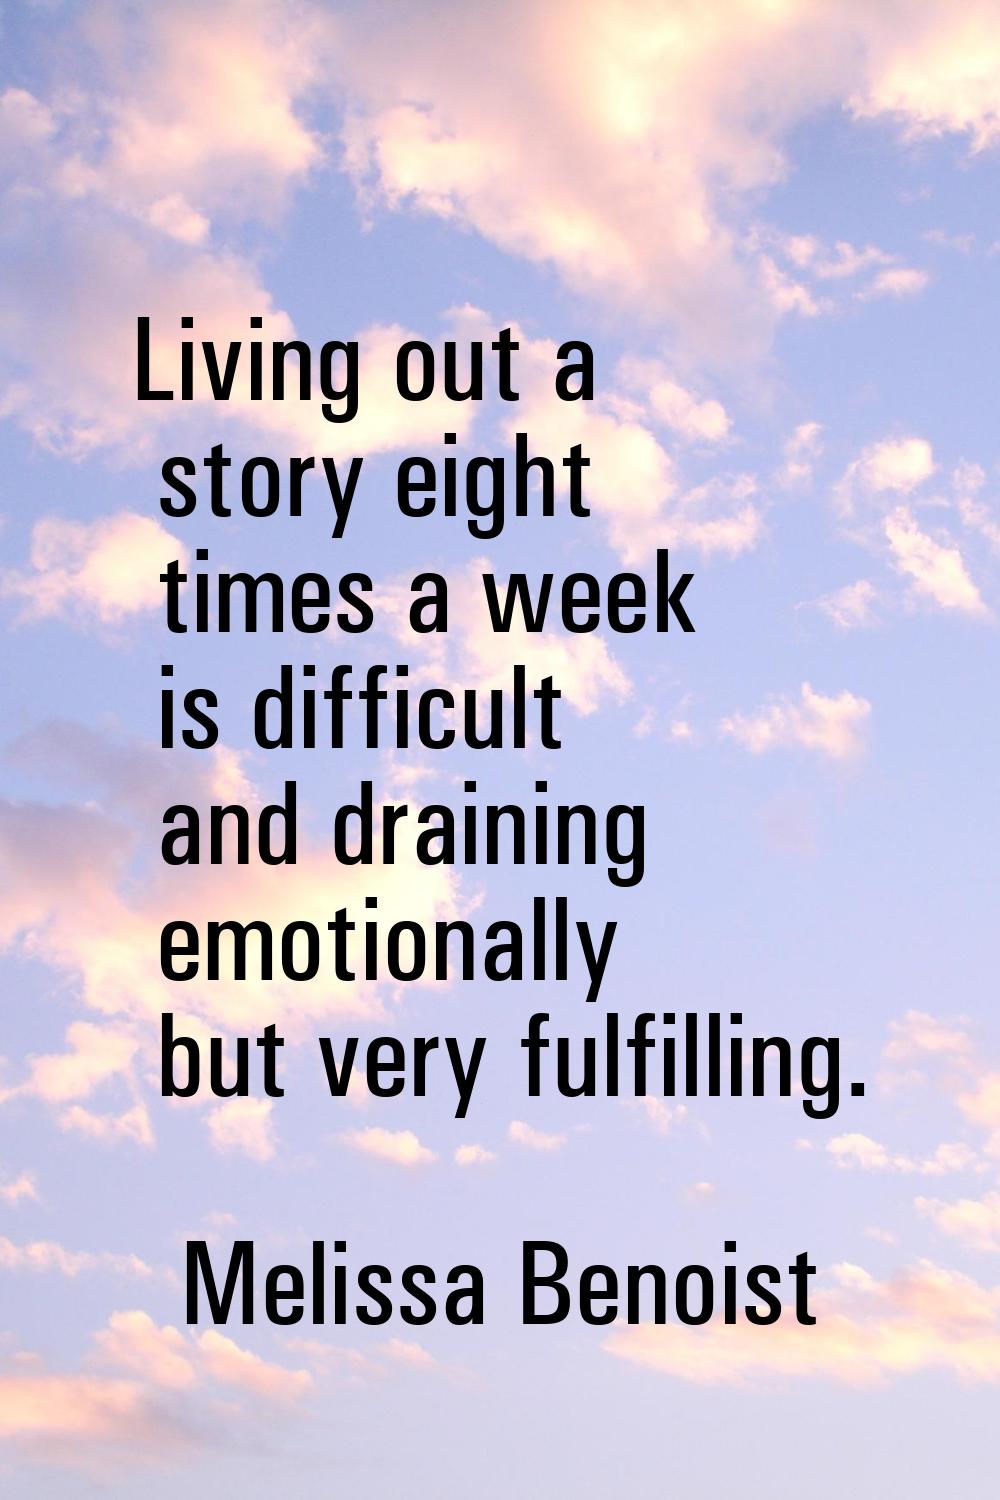 Living out a story eight times a week is difficult and draining emotionally but very fulfilling.